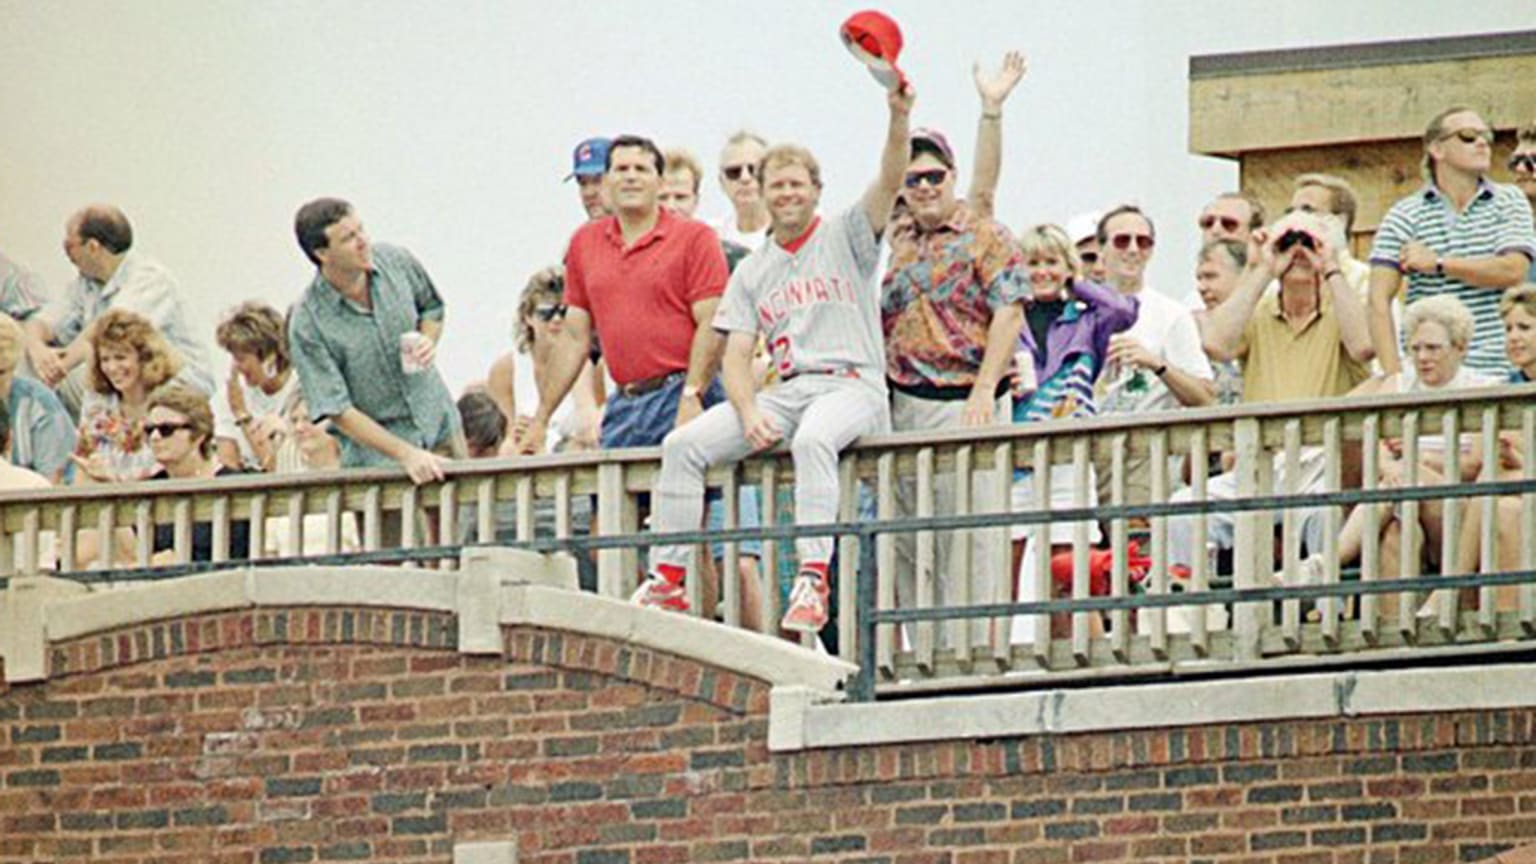 A player in a Reds uniform sits on a balcony railing and waves his cap